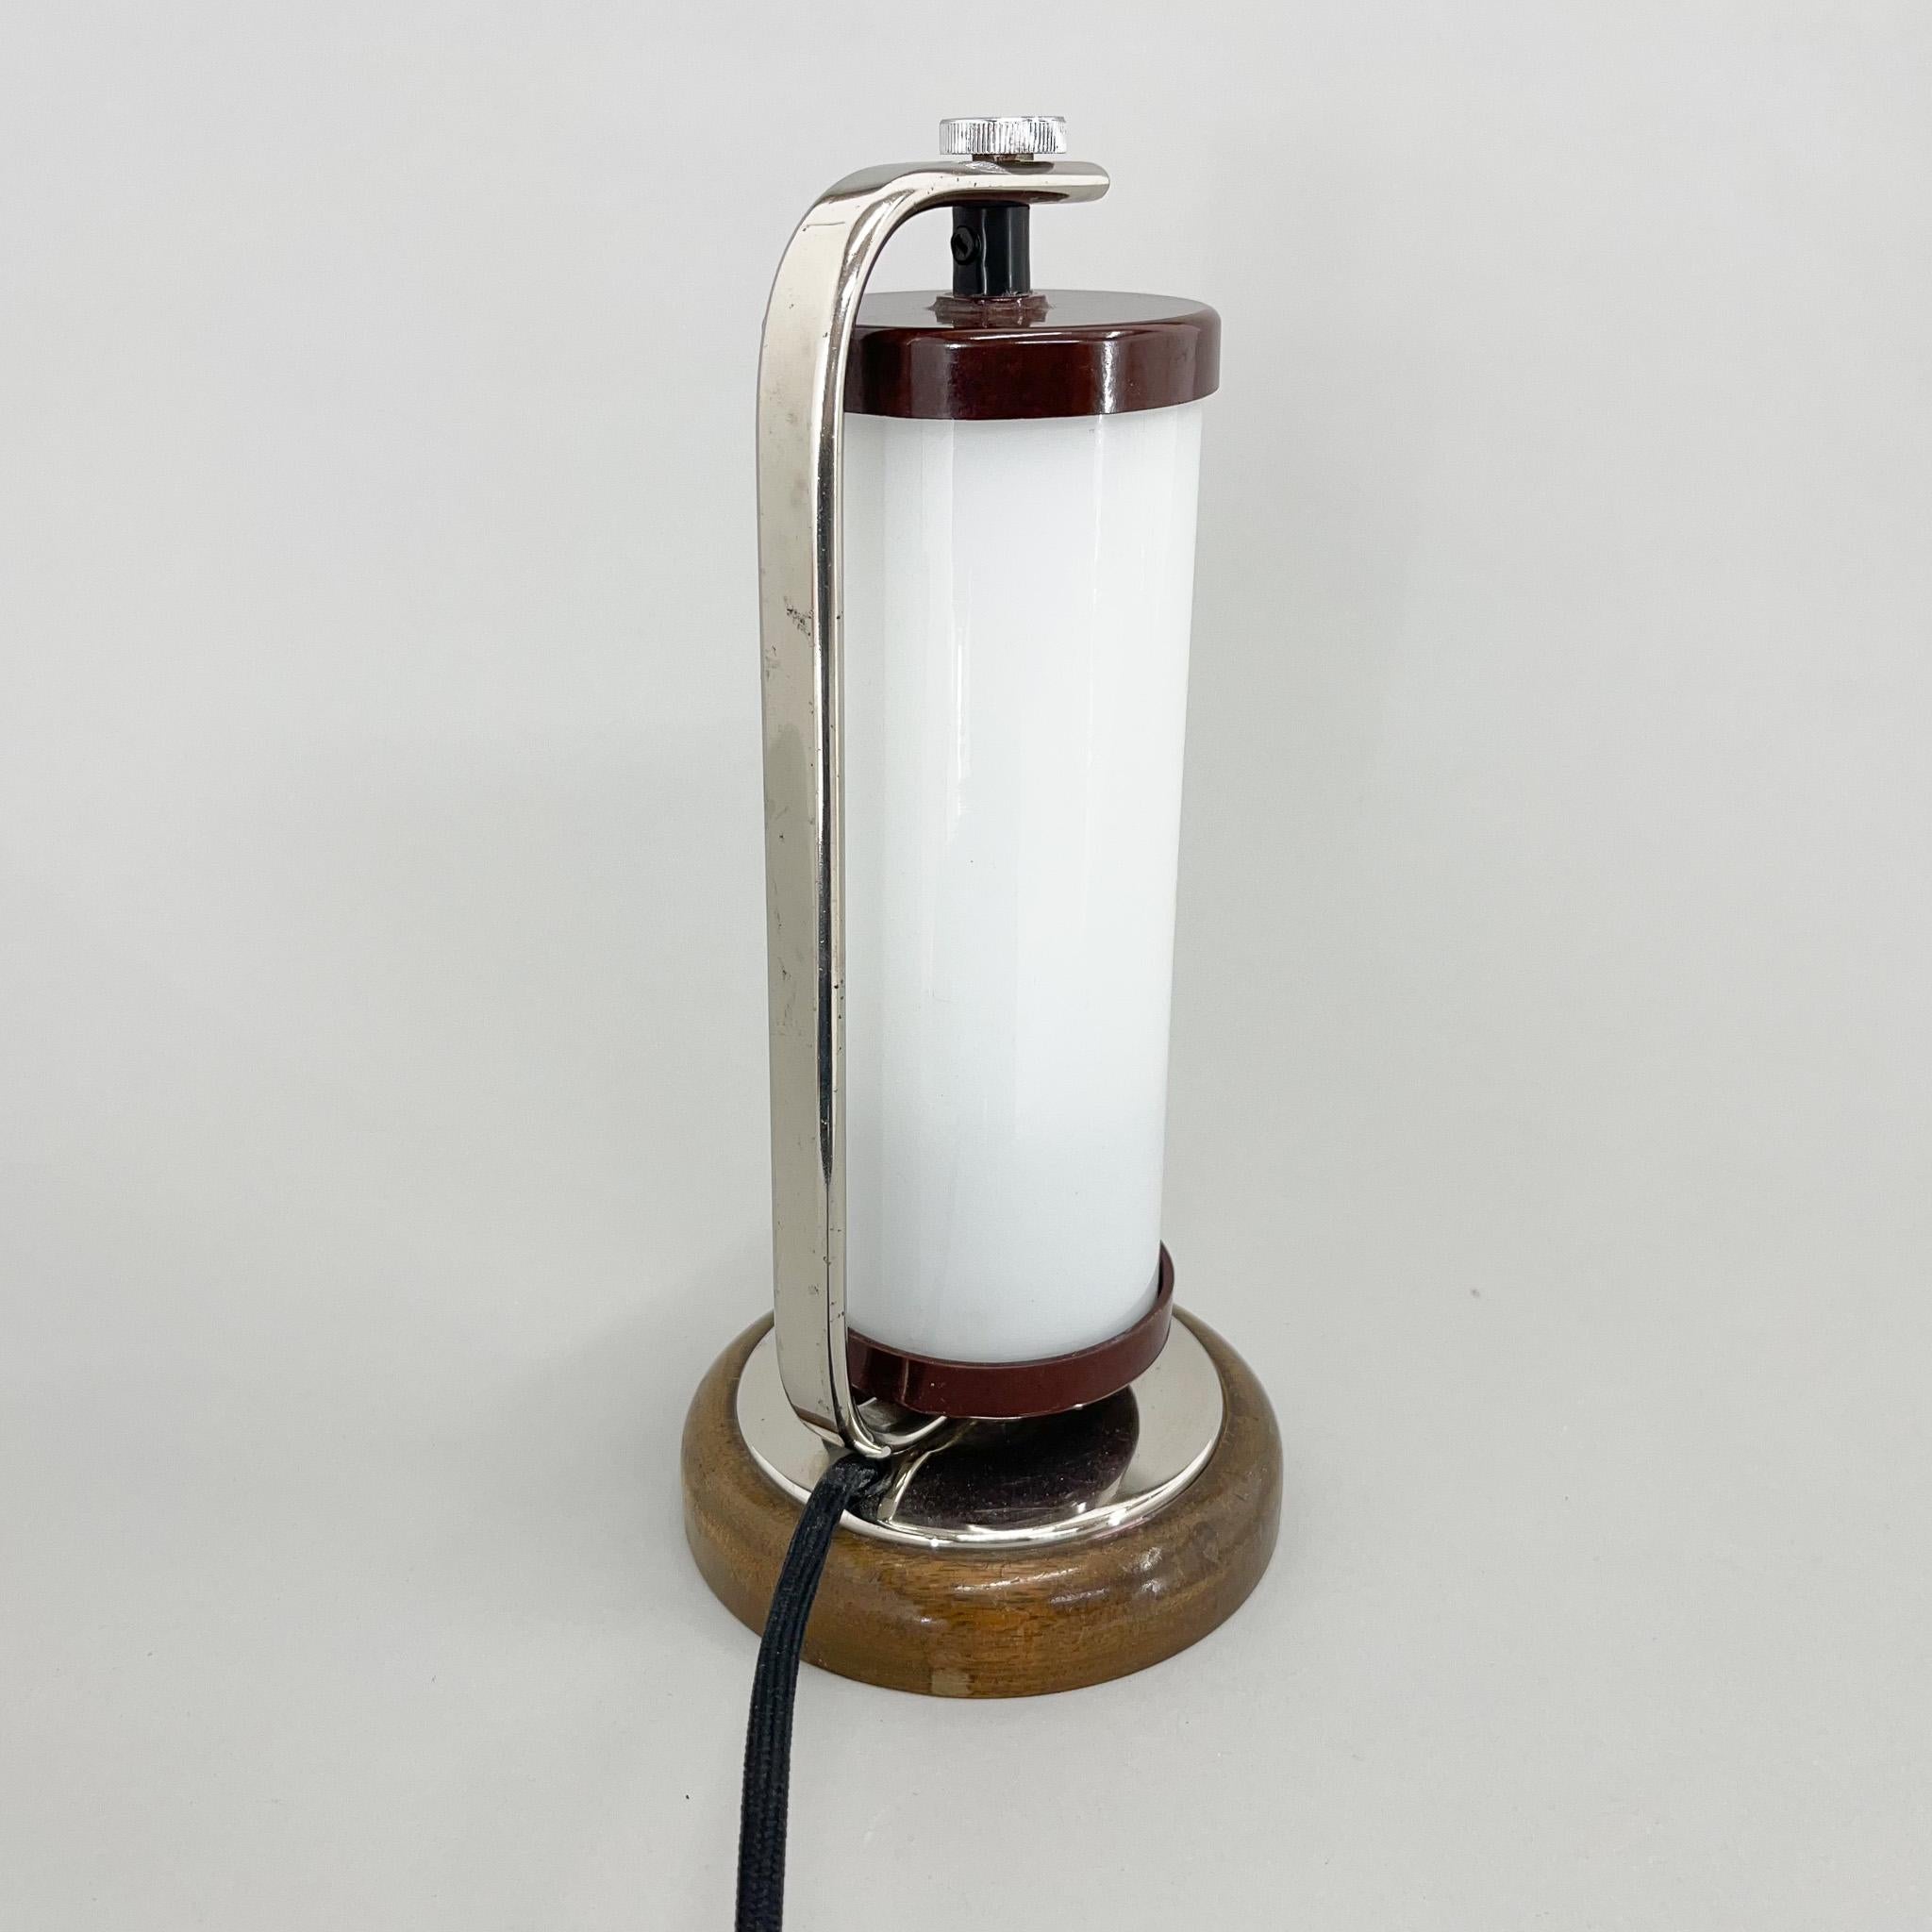 Czech Tubular Table or Bedside Lamp with Wooden Base, 1930's For Sale